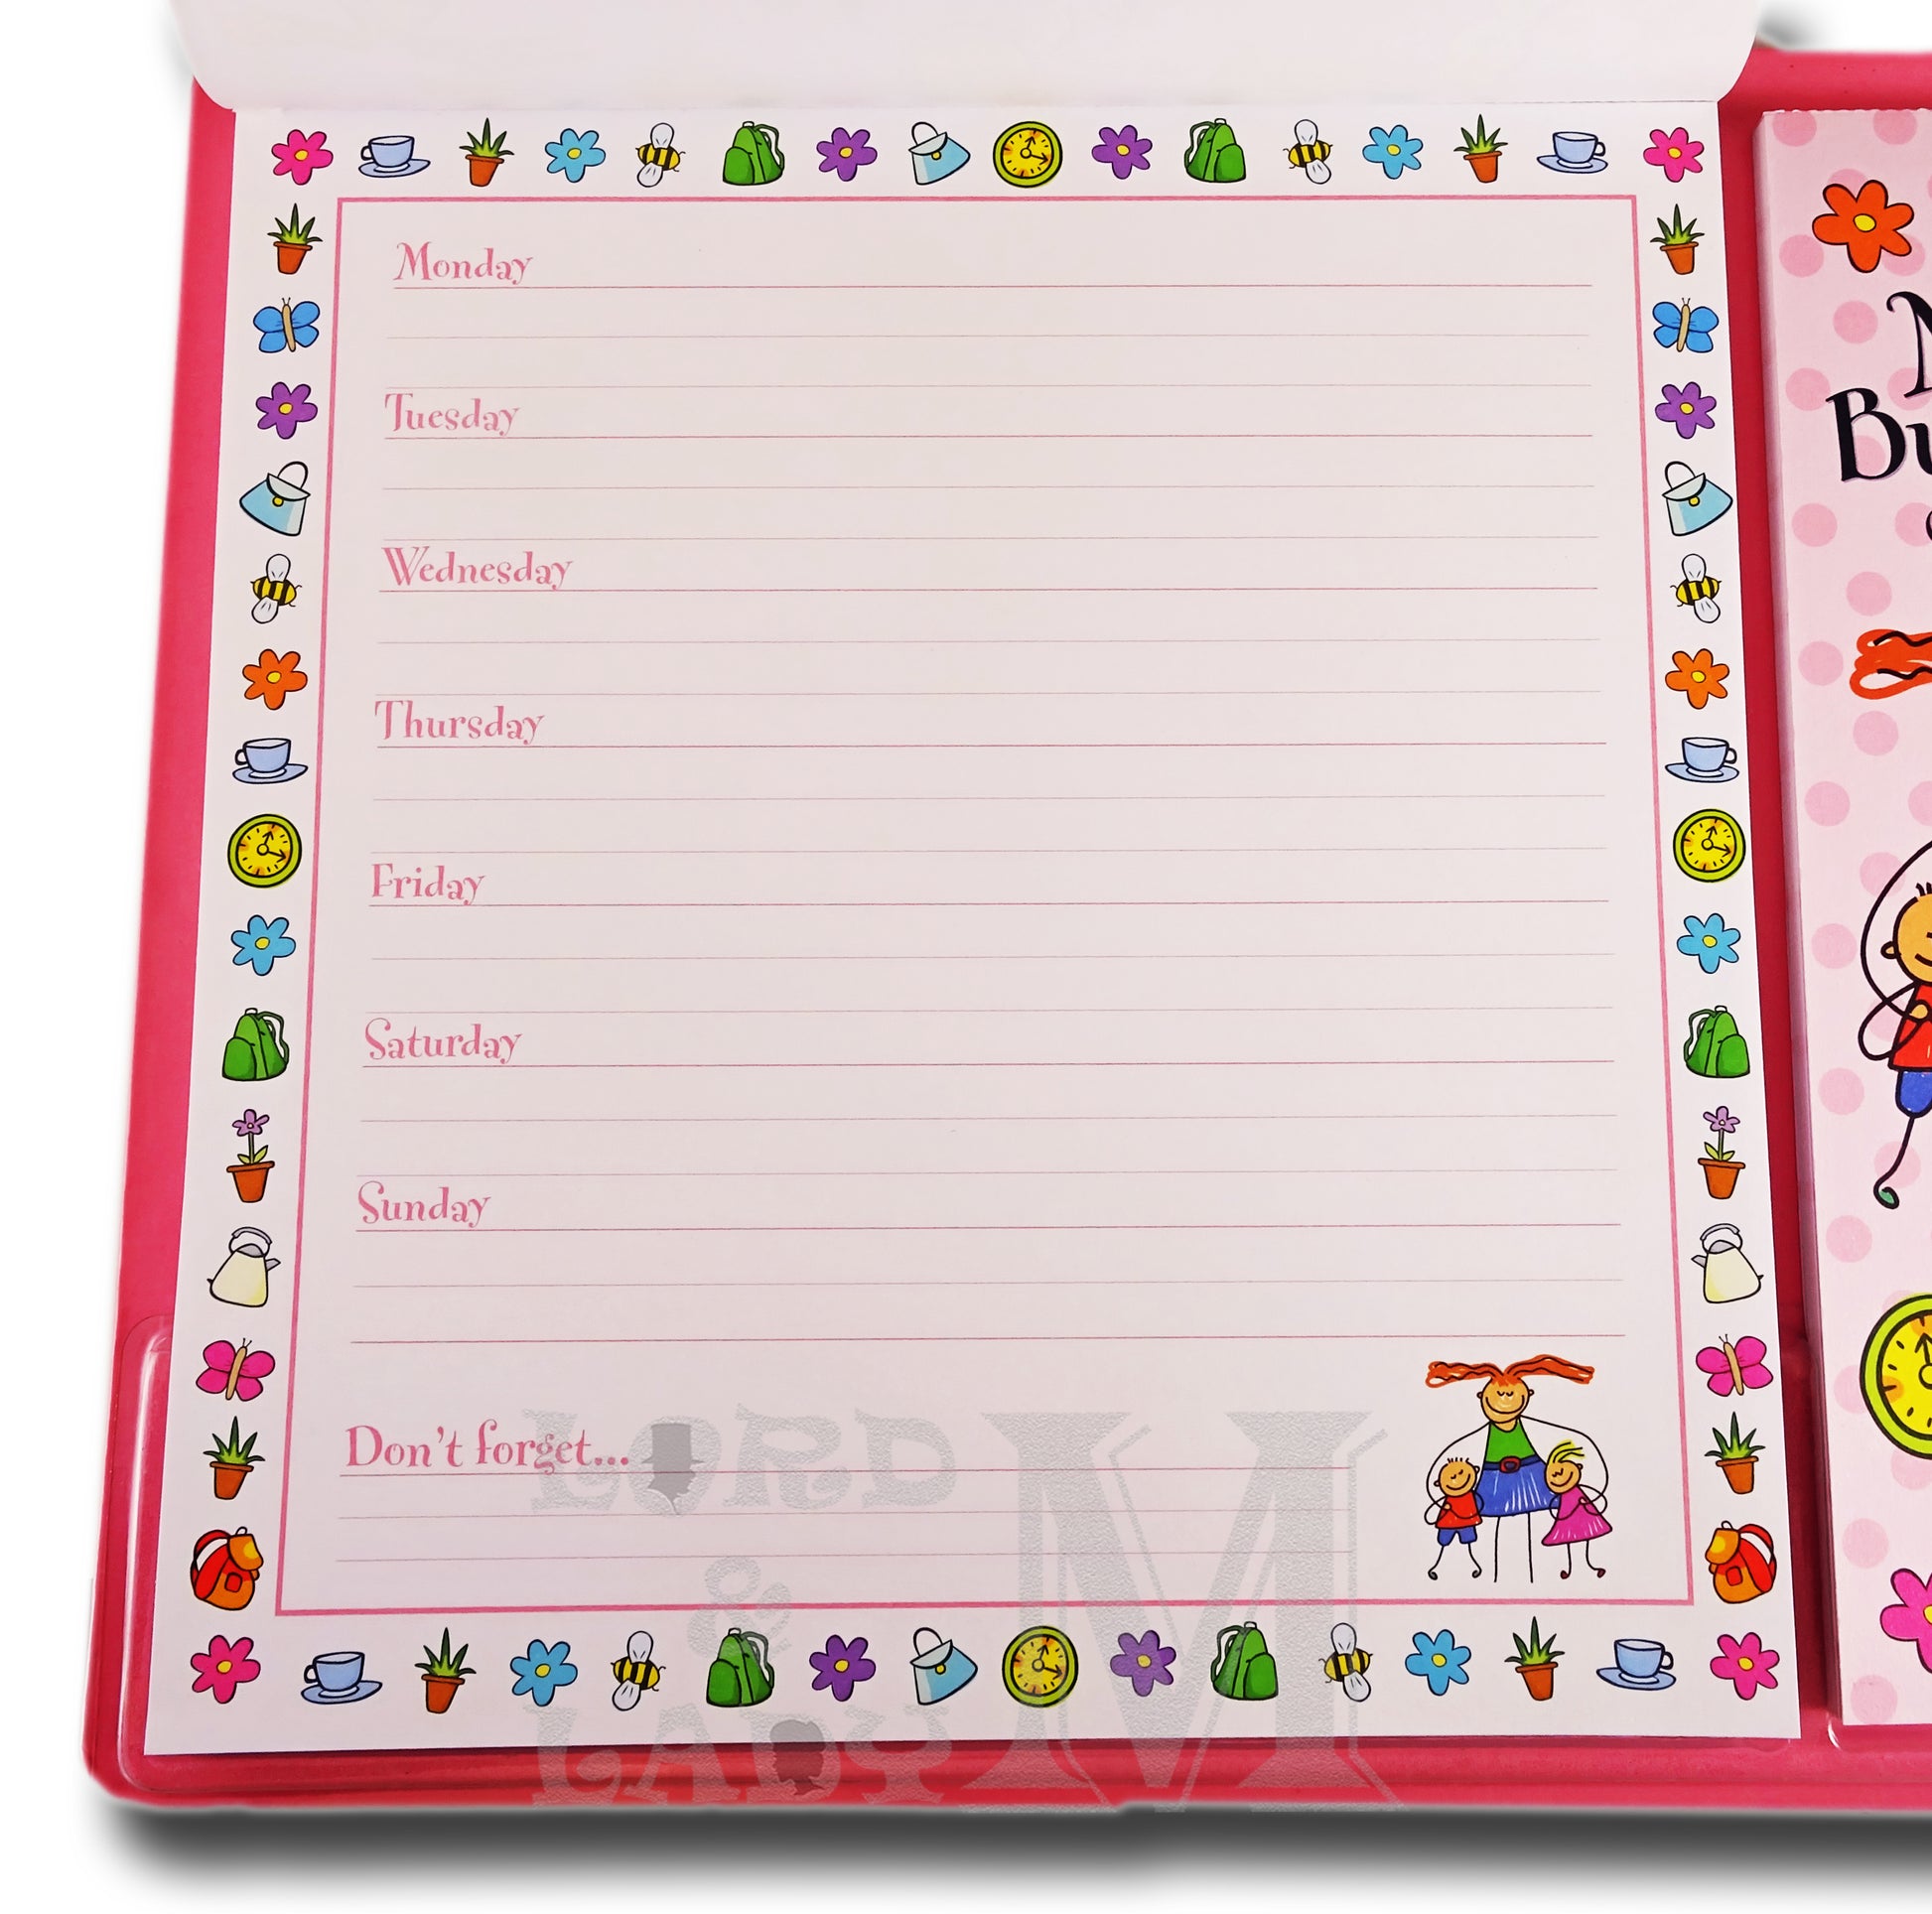 Mum's Busy Day Magnetic Weekly Planner And Shopping List - Perfect Gift Idea